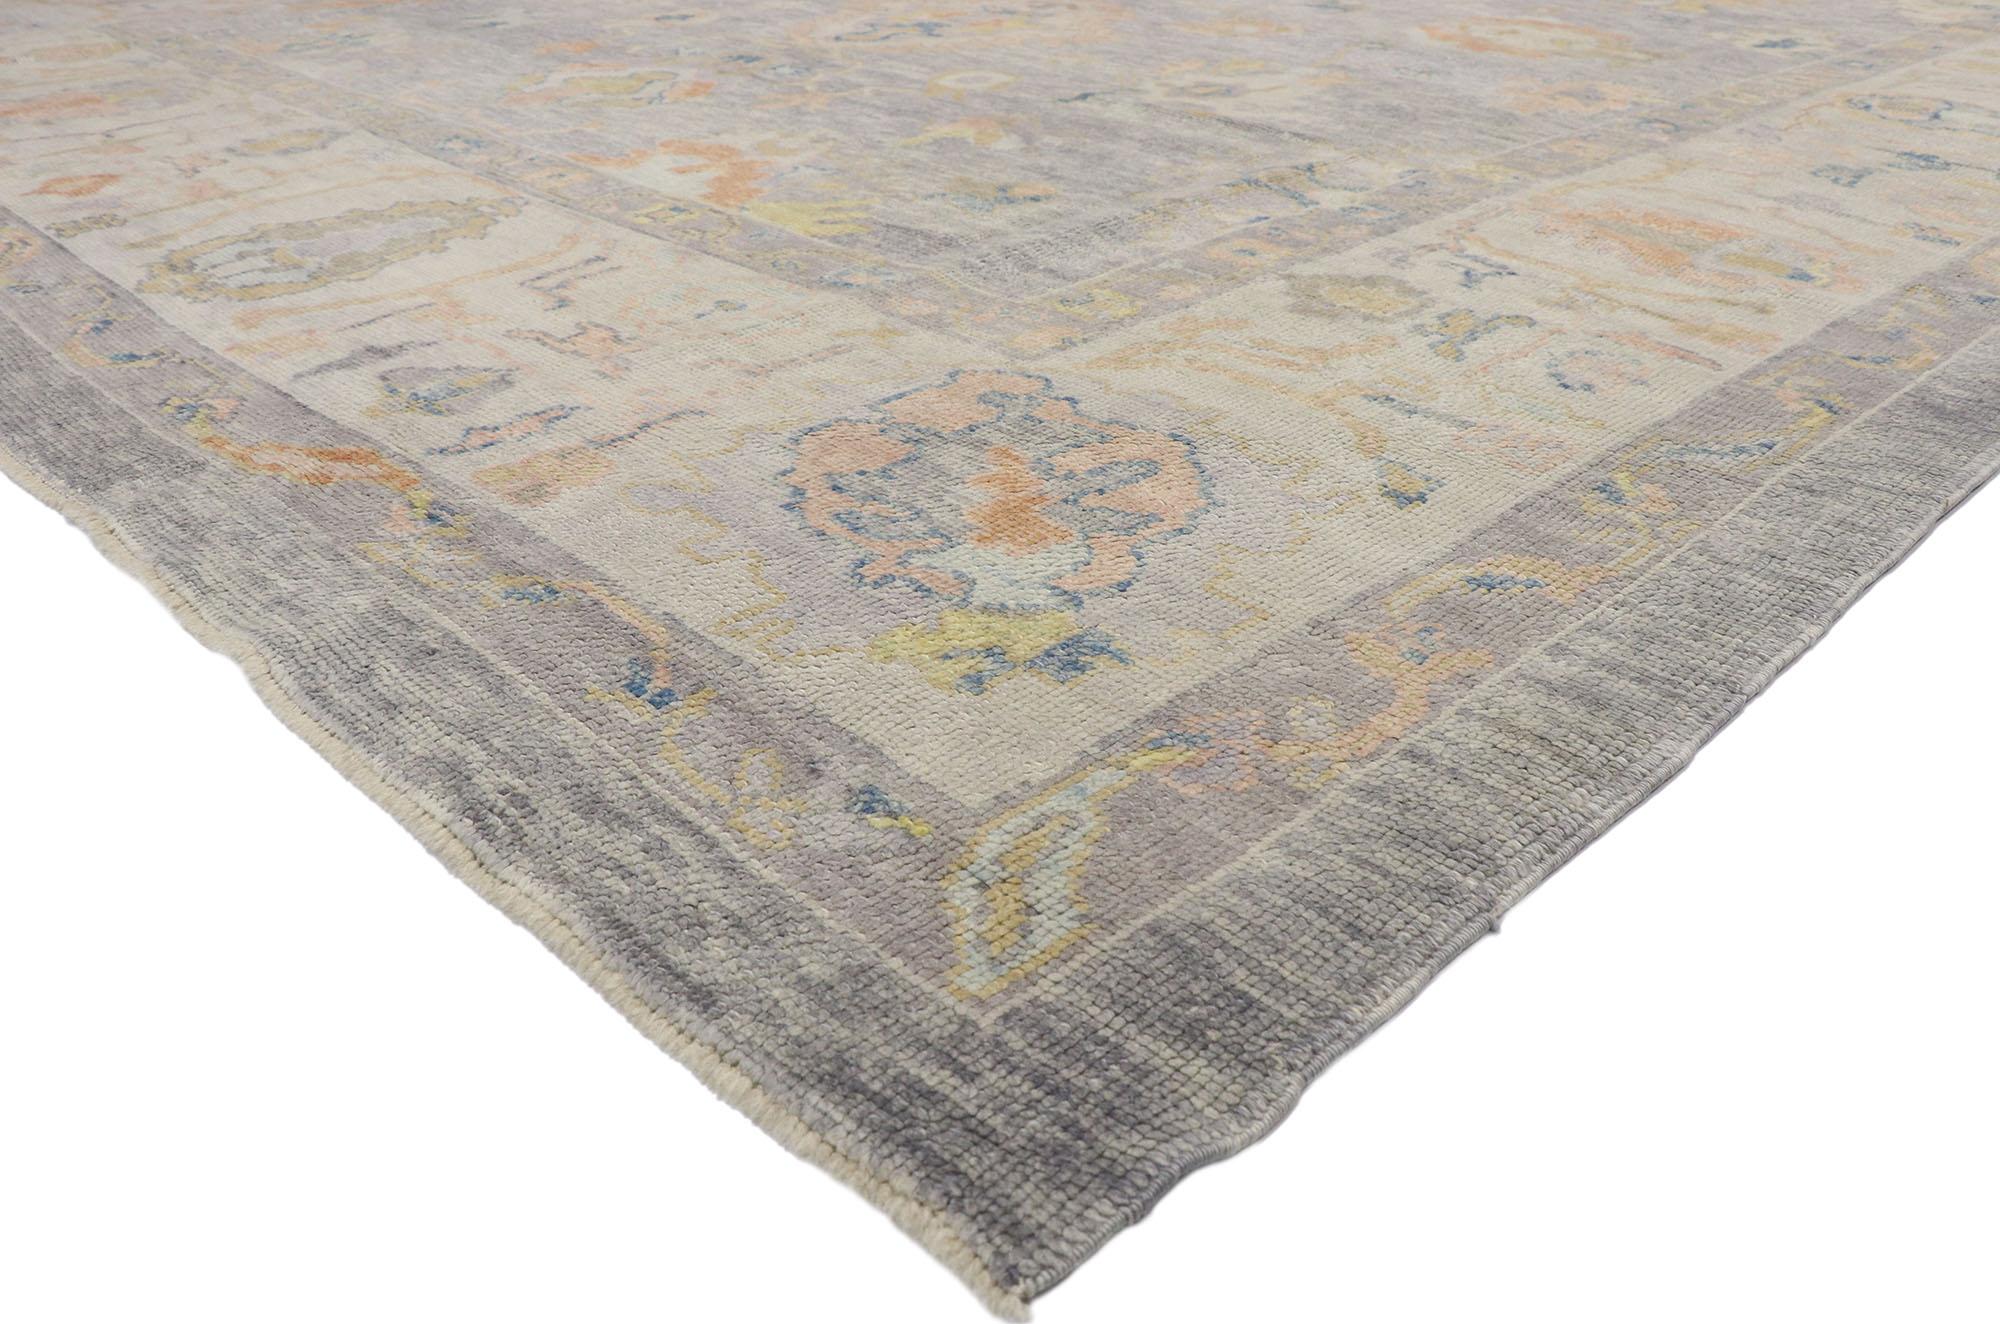 52731 New Turkish Oushak Rug with Transitional Style 11'01 x 14'00. Incorporating a harmonious blend of modernity and timeless elegance, this hand-knotted wool Turkish Oushak style area rug introduces an aura of sophistication to any living space.